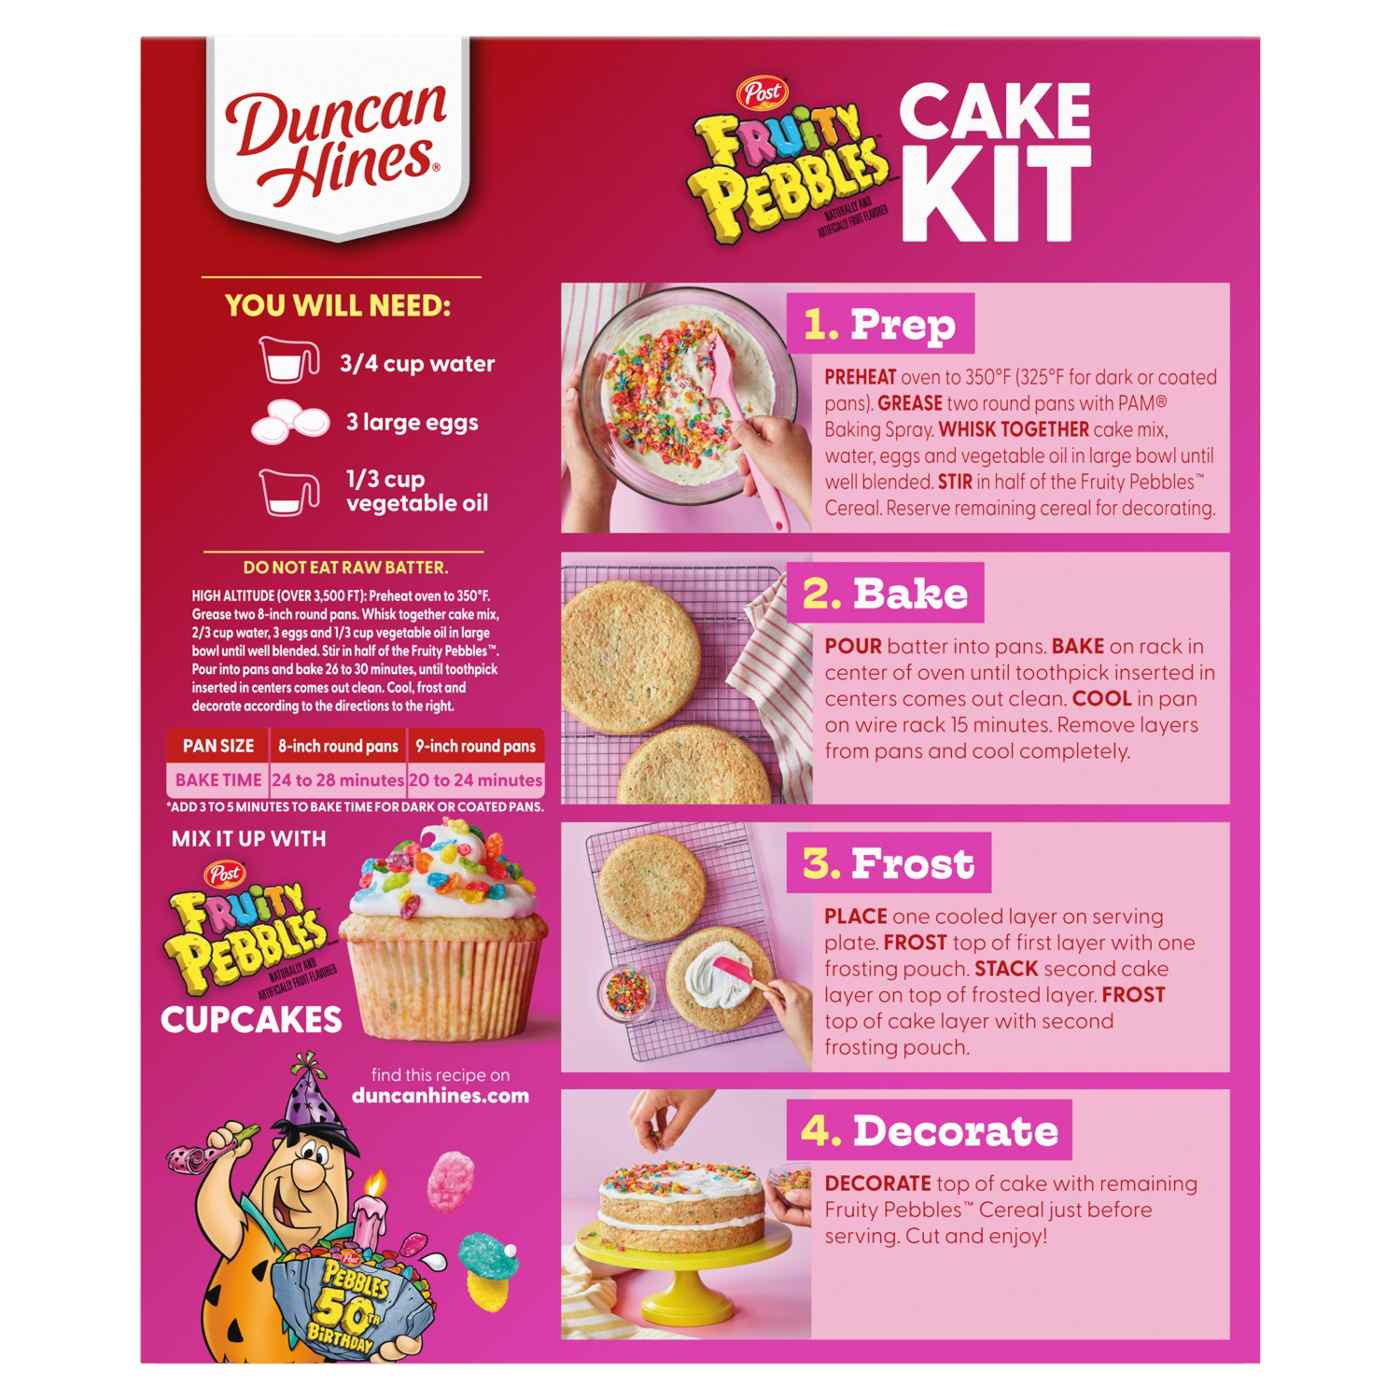 Duncan Hines EPIC Fruity Pebbles Cake Mix Kit; image 5 of 7